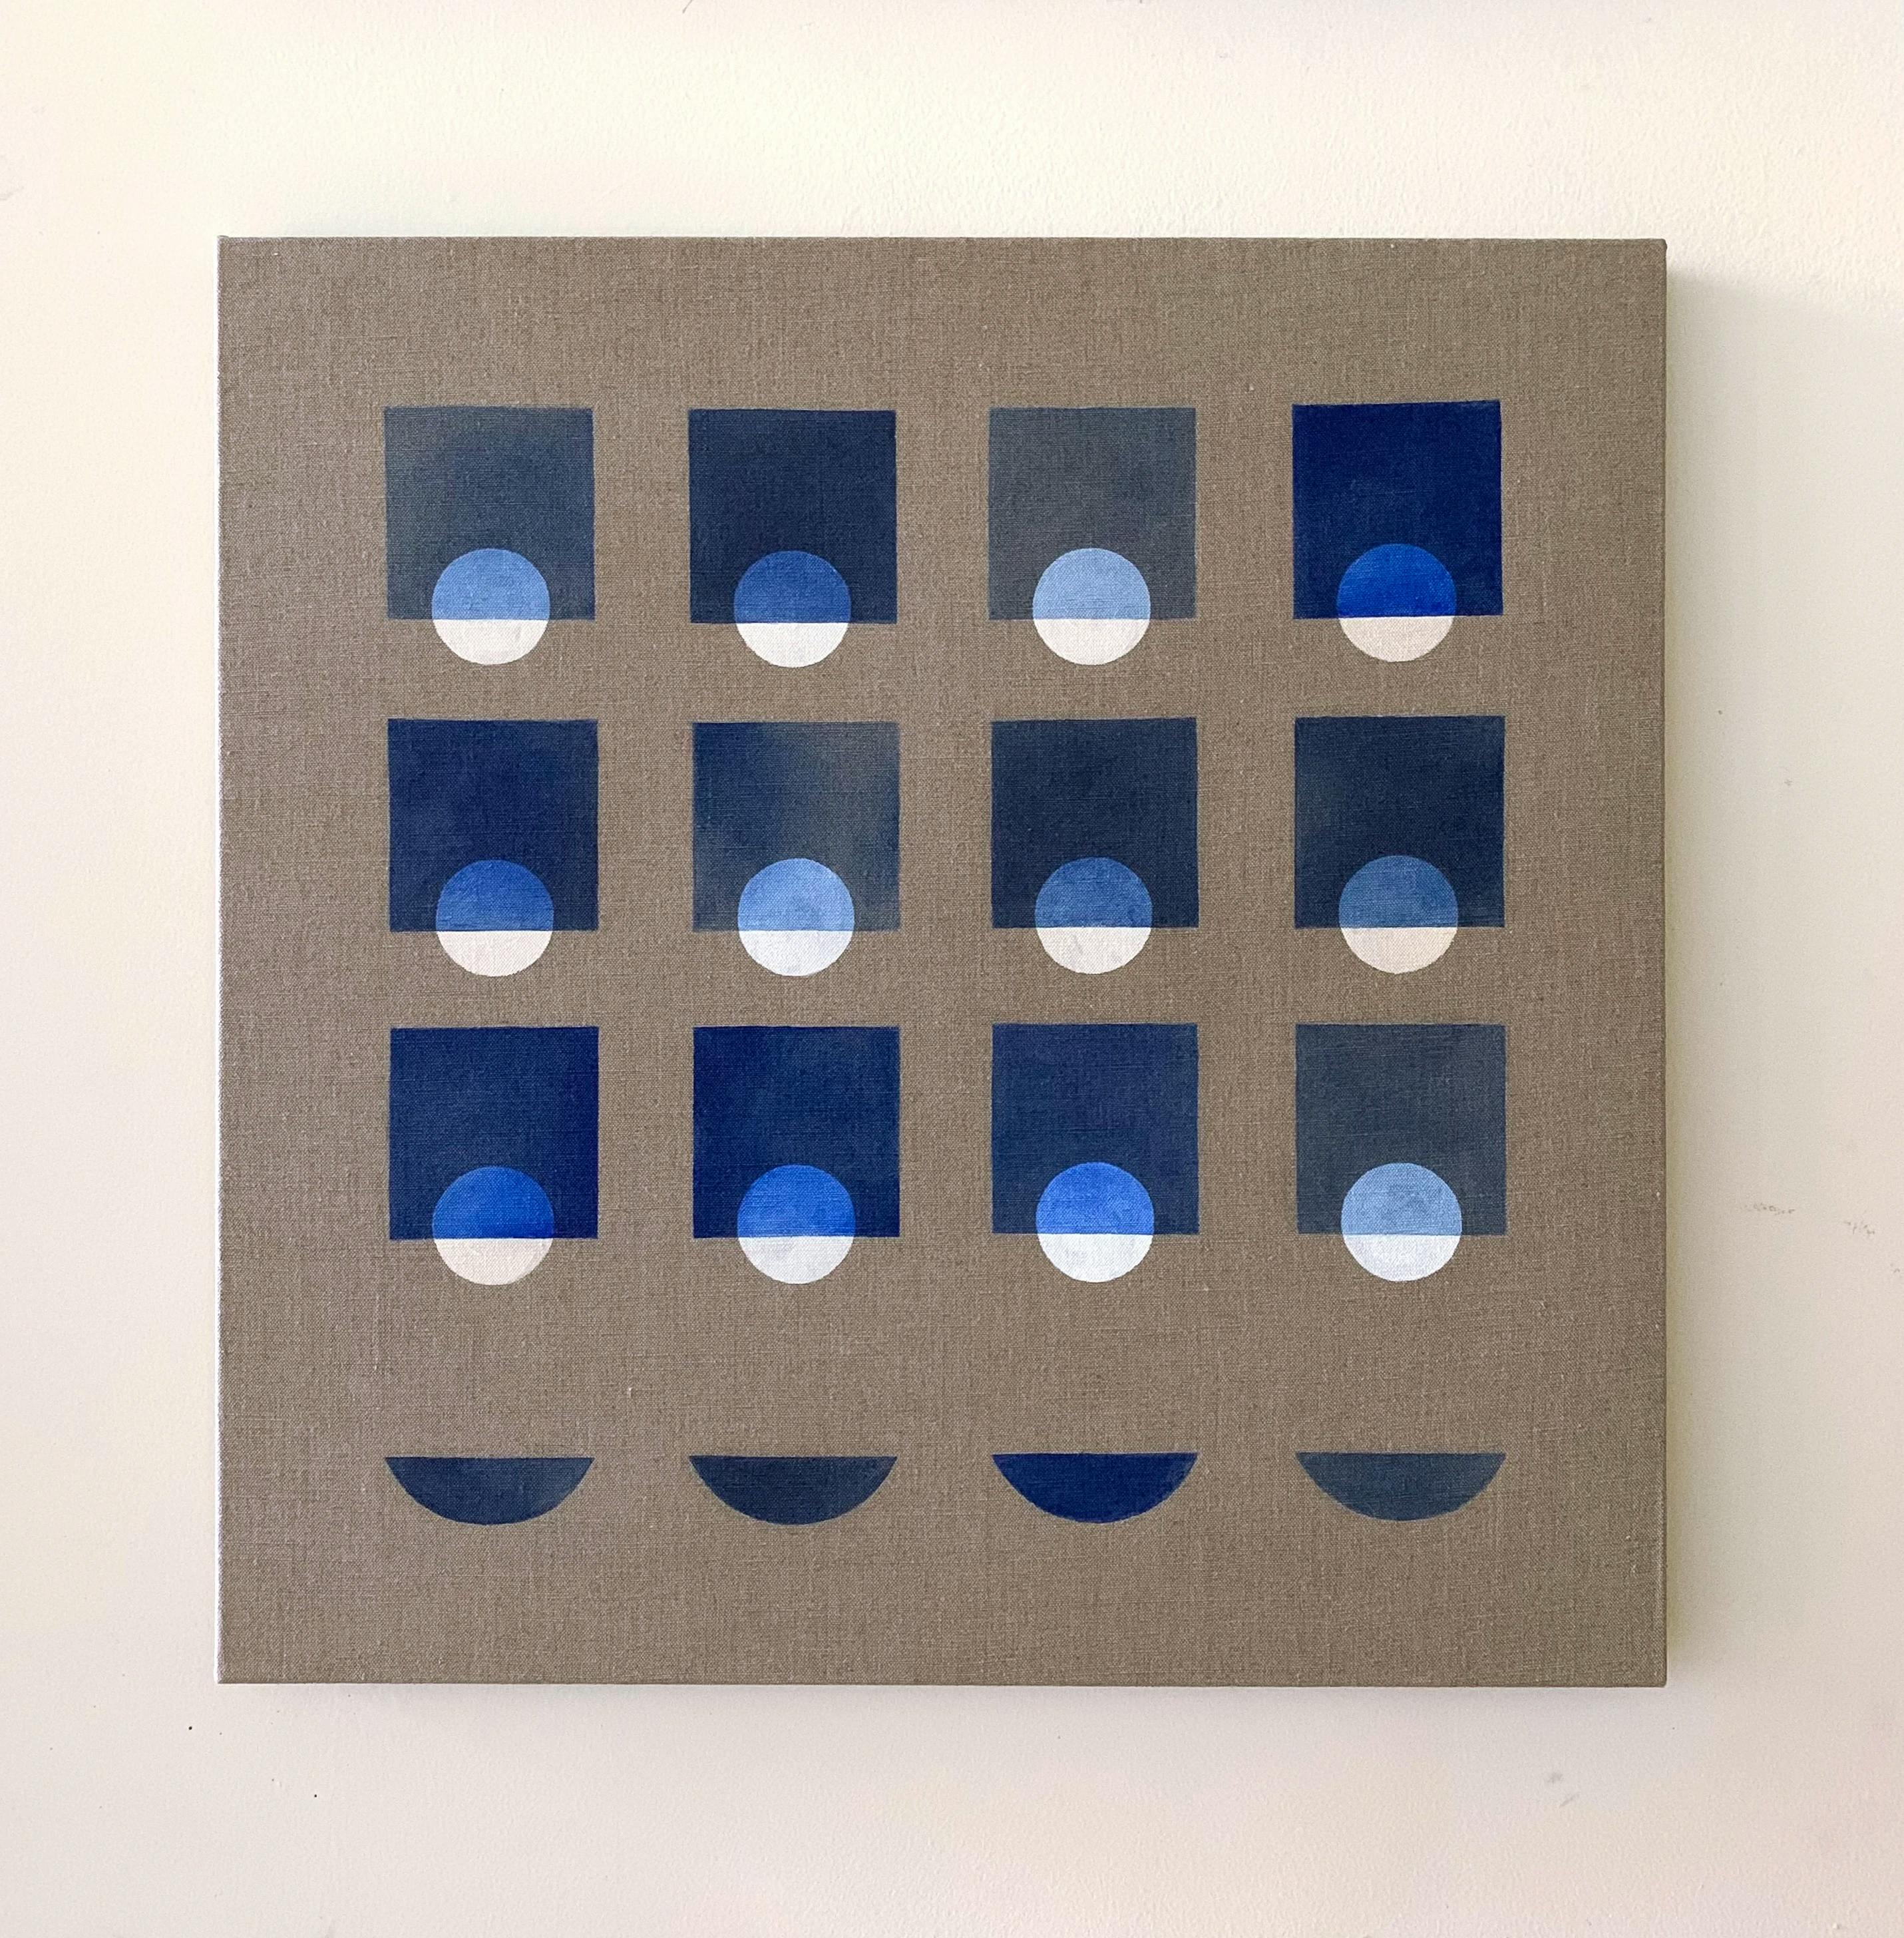 Grey oil painting on linen with a grid of repeating blue rectangles and circles by artist Carla Weeks.